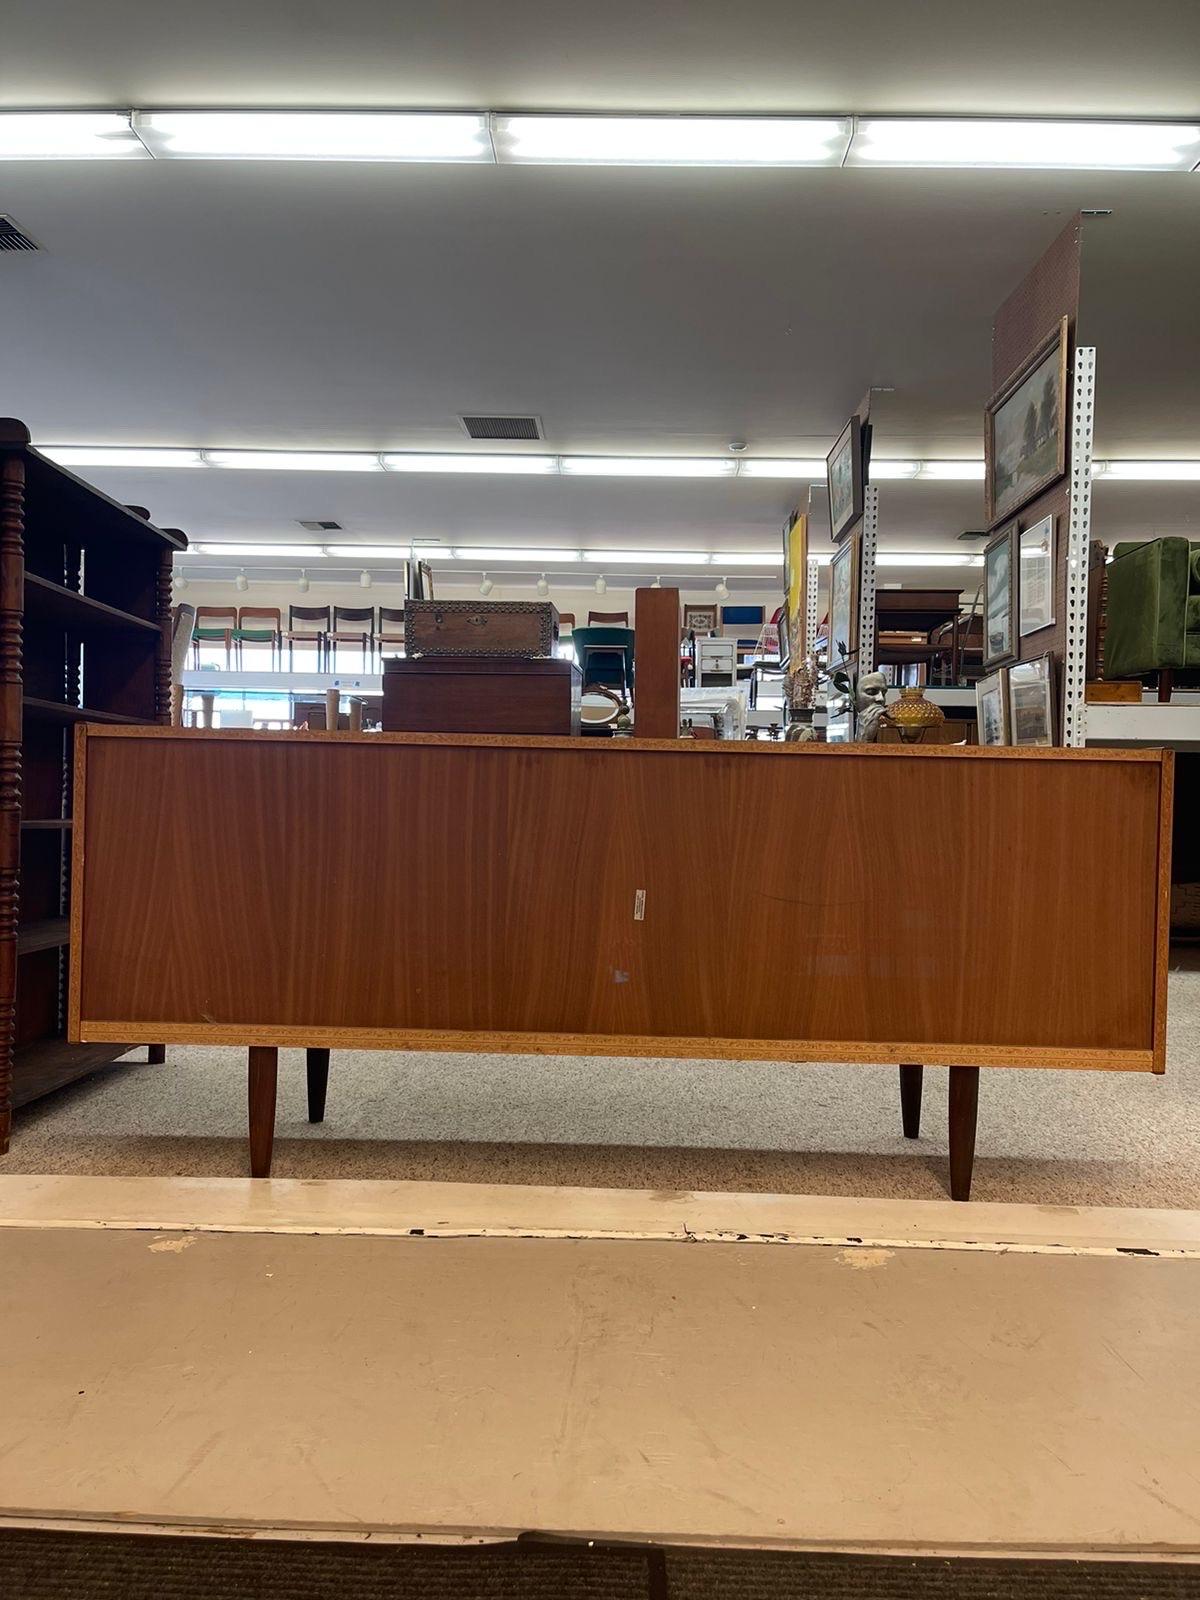 This Credenza Features Adjustable Shelves and Two FeltedDrawers with Dovetail Detailing. Makers Mark on the Back Stating “ JYDSK MOBELINDUSTRI SKANDERBORG “ . Made in Denmark as Pictured.

Dimensions. 71 W ; 17 1/2 D ; 30 H